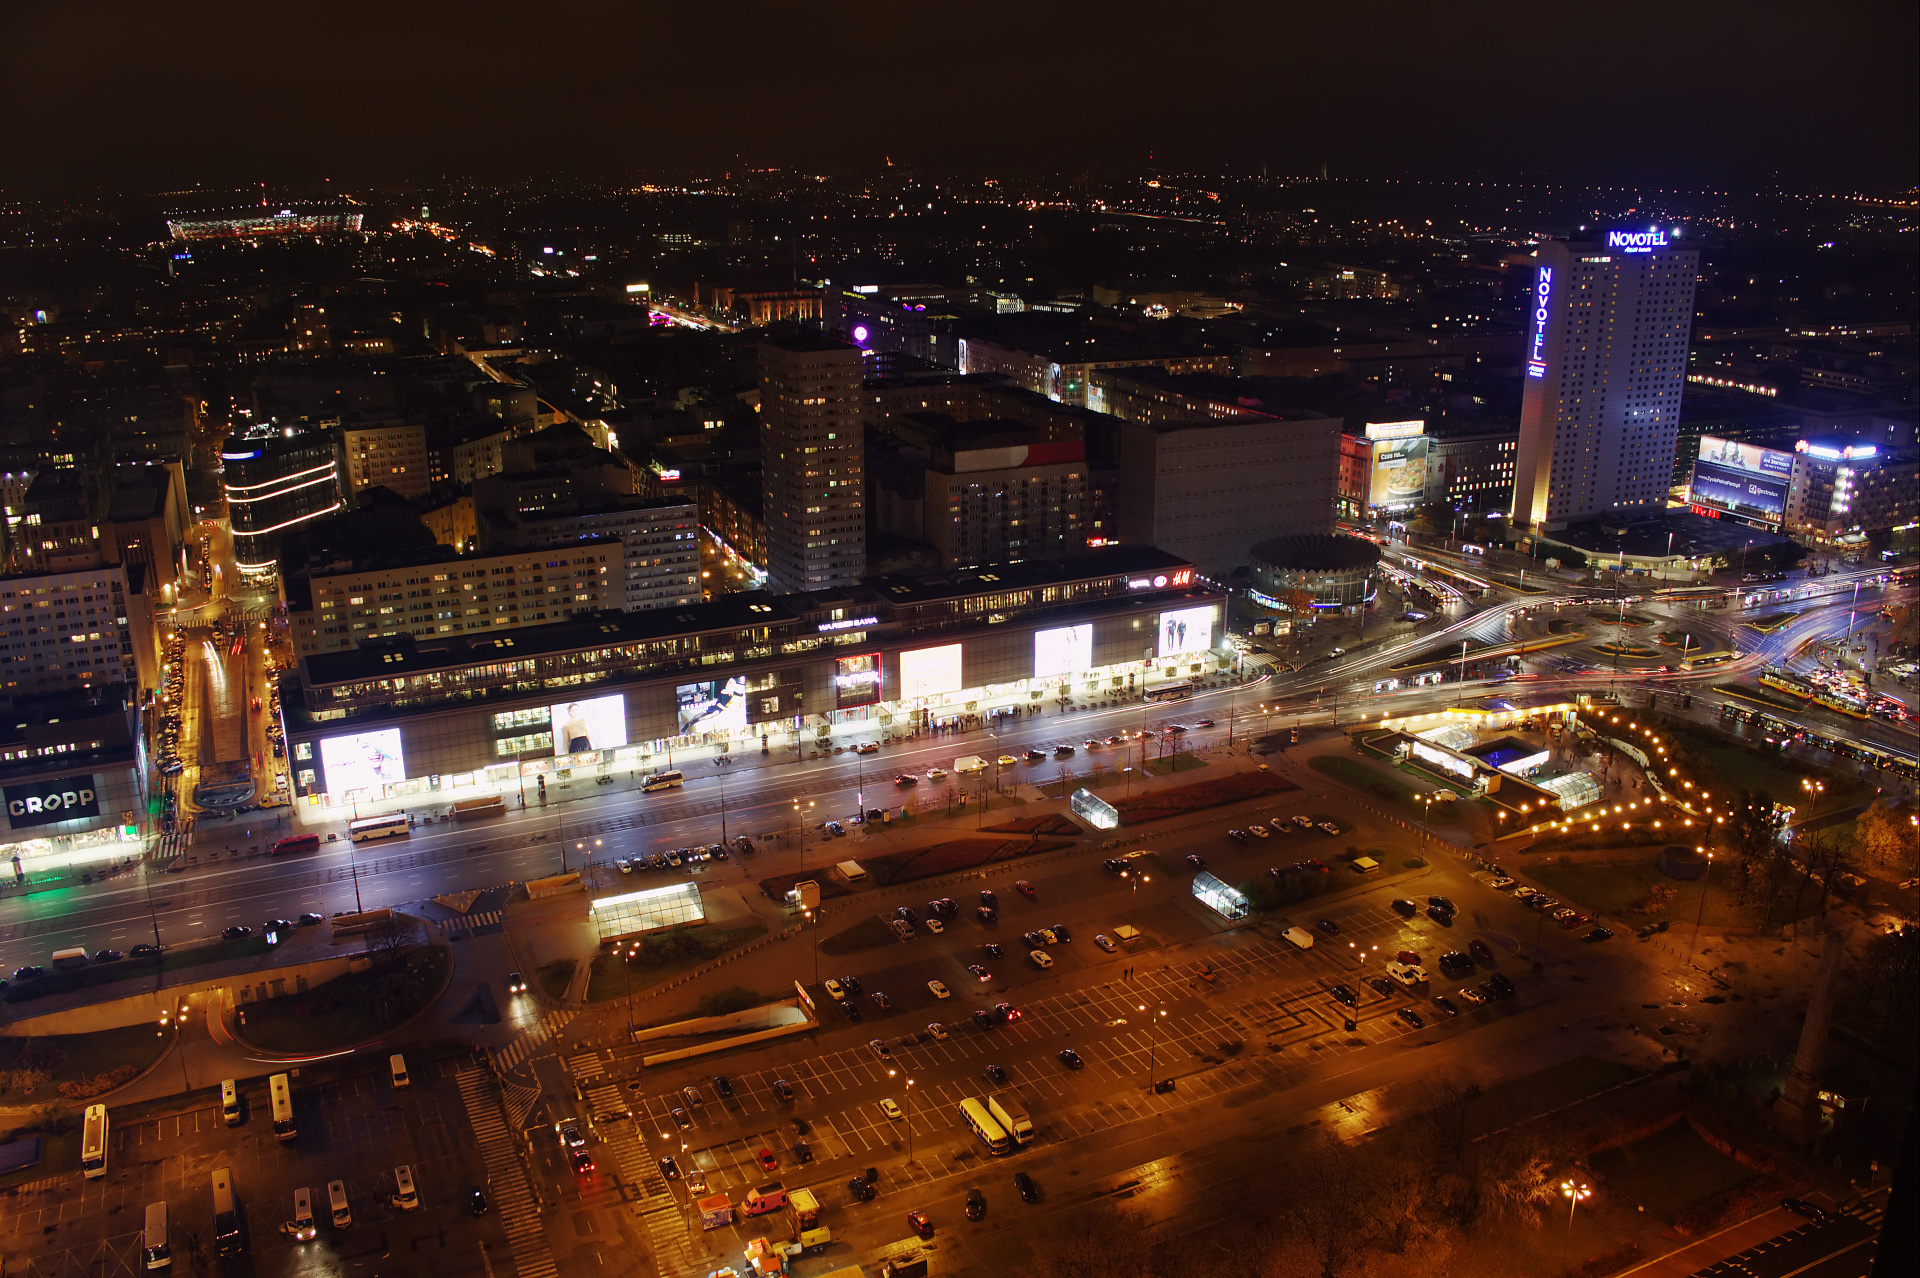 Centrum Shopping Mall, Parade Square, Powiśle (Warsaw » Warsaw from Above)